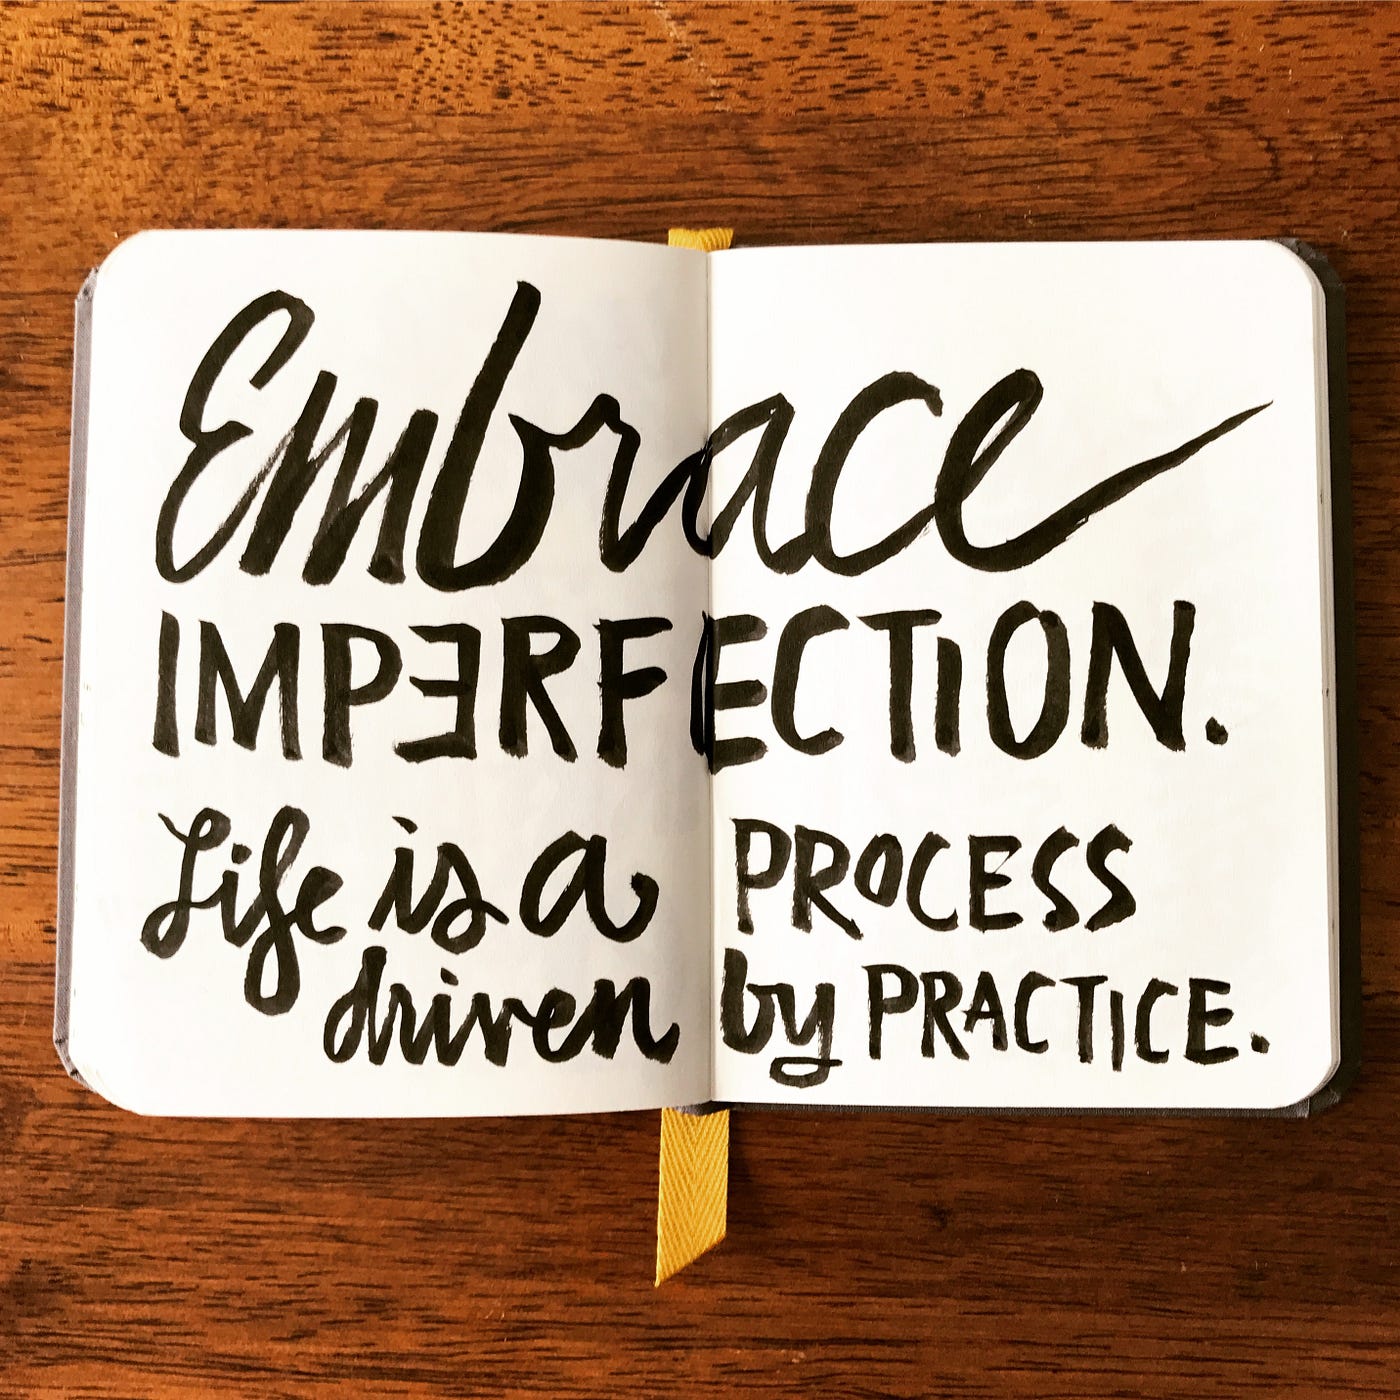 Embrace Imperfection. Life is a process driven by practice…, by Mike Rohde